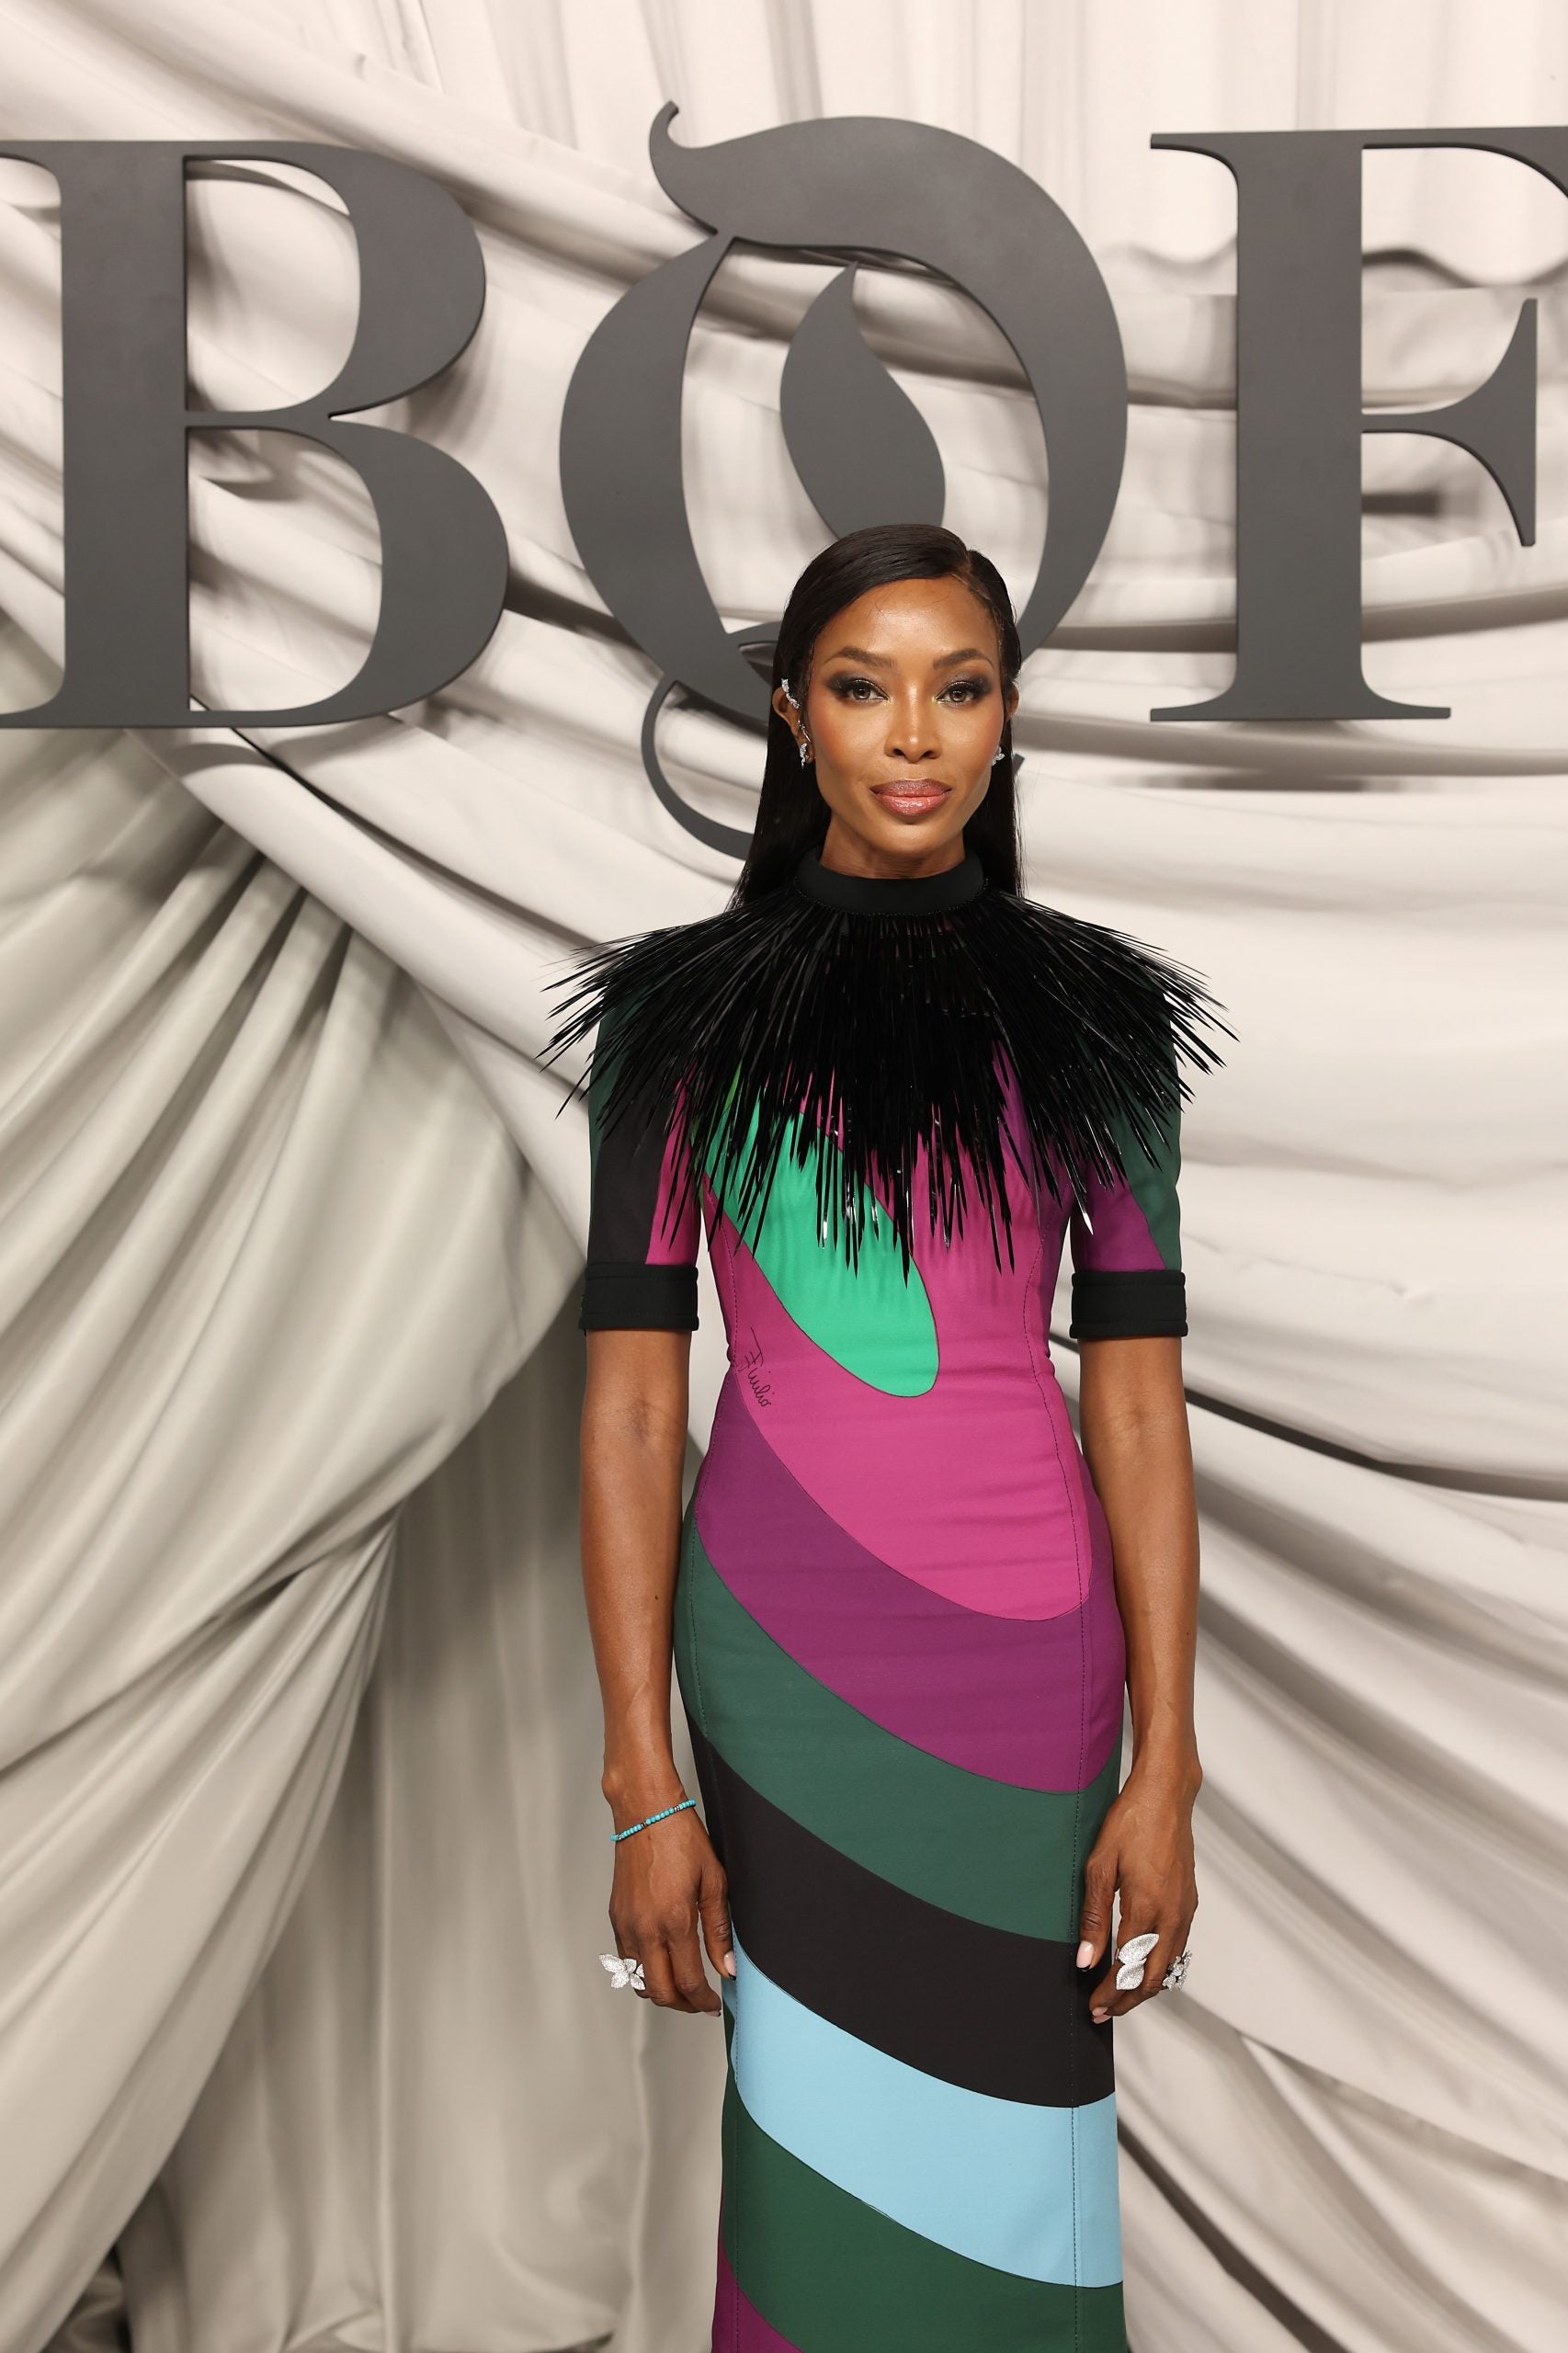 The Best Business Of Fashion 500 Gala Red Carpet Looks